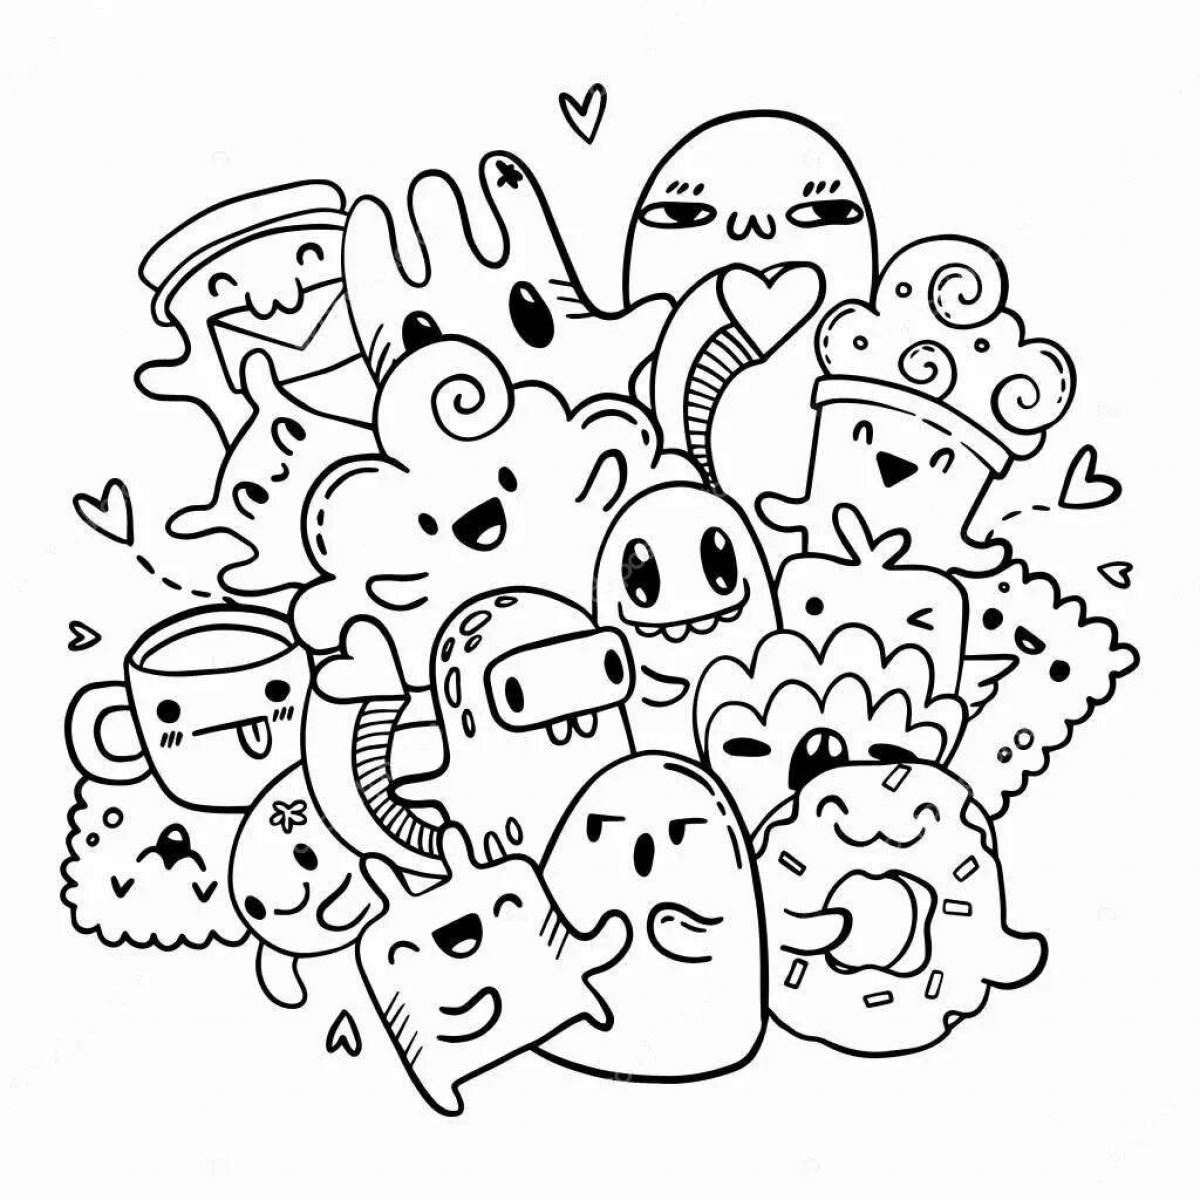 Dazzlingly cute monster coloring page